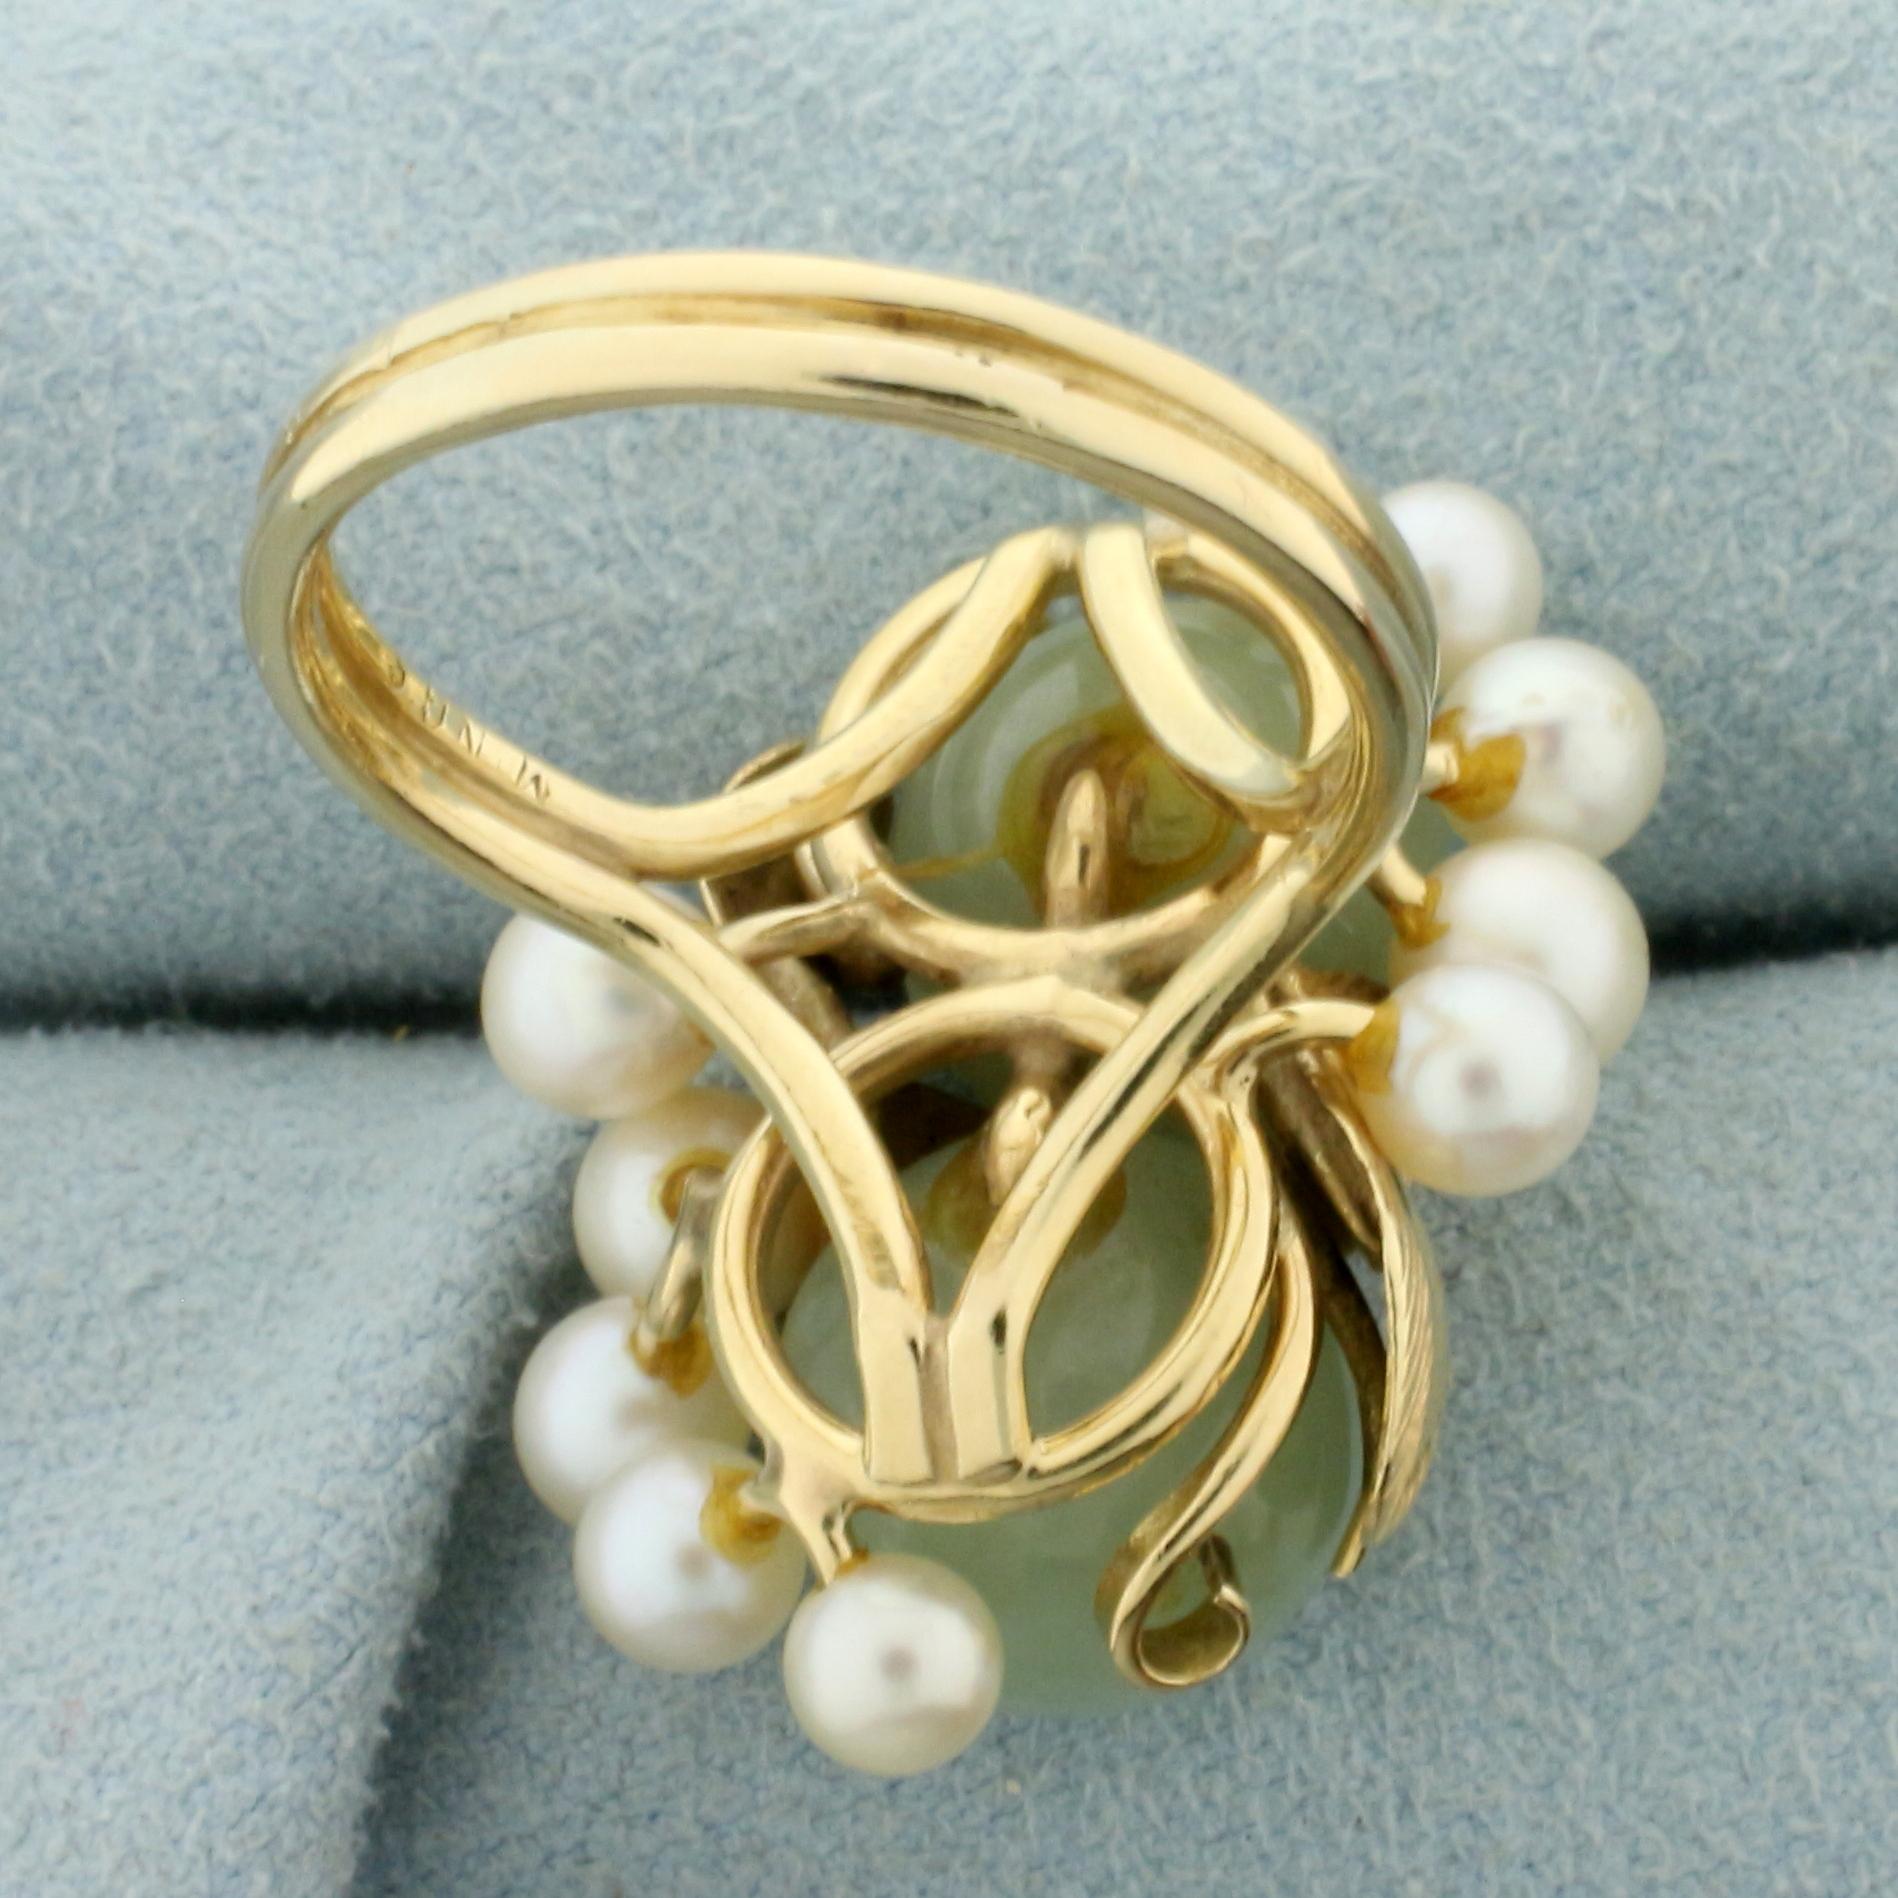 Designer Ming's Hawaii Jade And Pearl Leaf Design Ring In 14k Yellow Gold